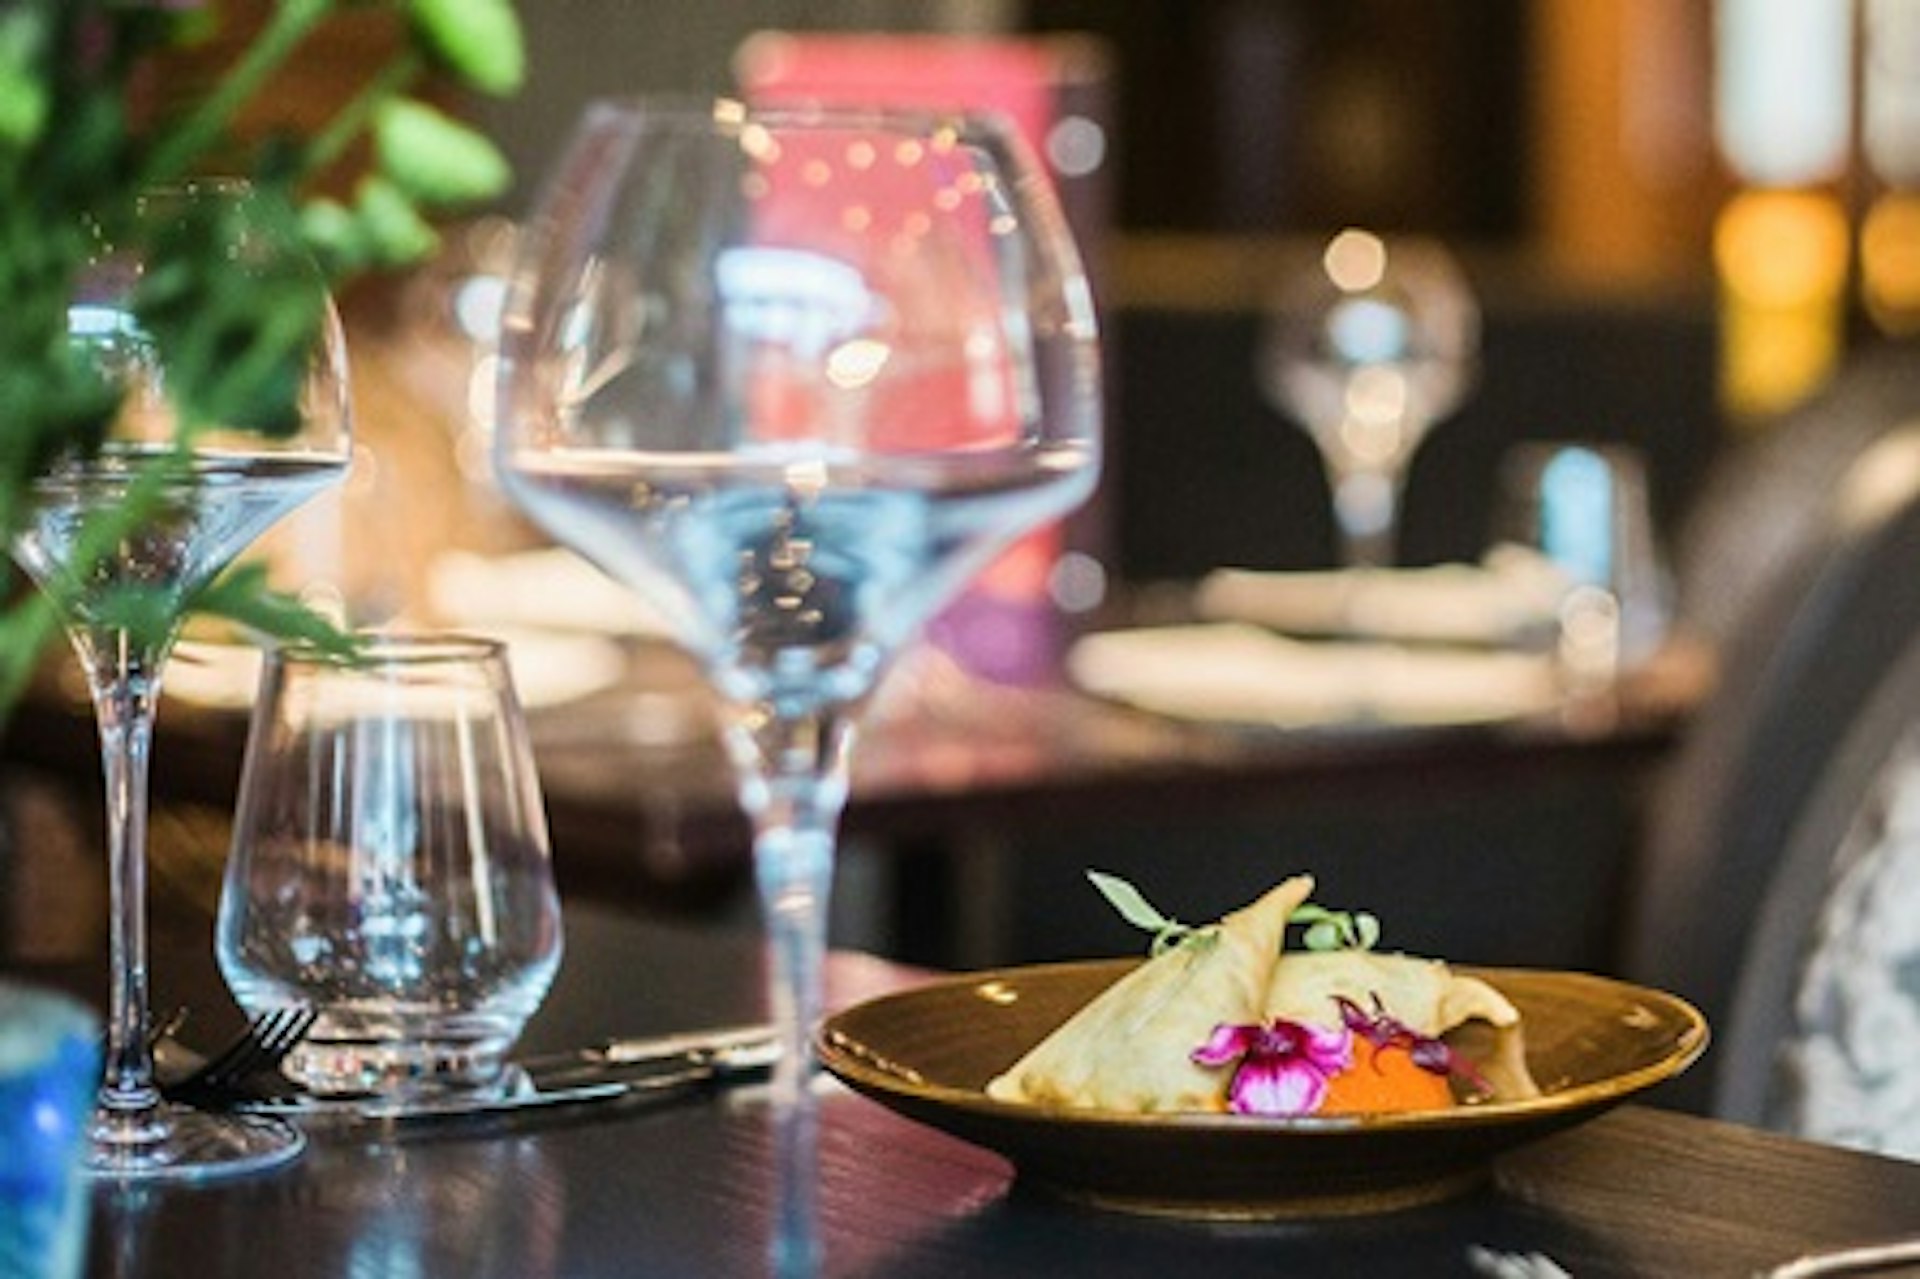 Six Course Contemporary Indian Tasting Menu with Wine Flight for Two at Michelin Recommended Asha's 4